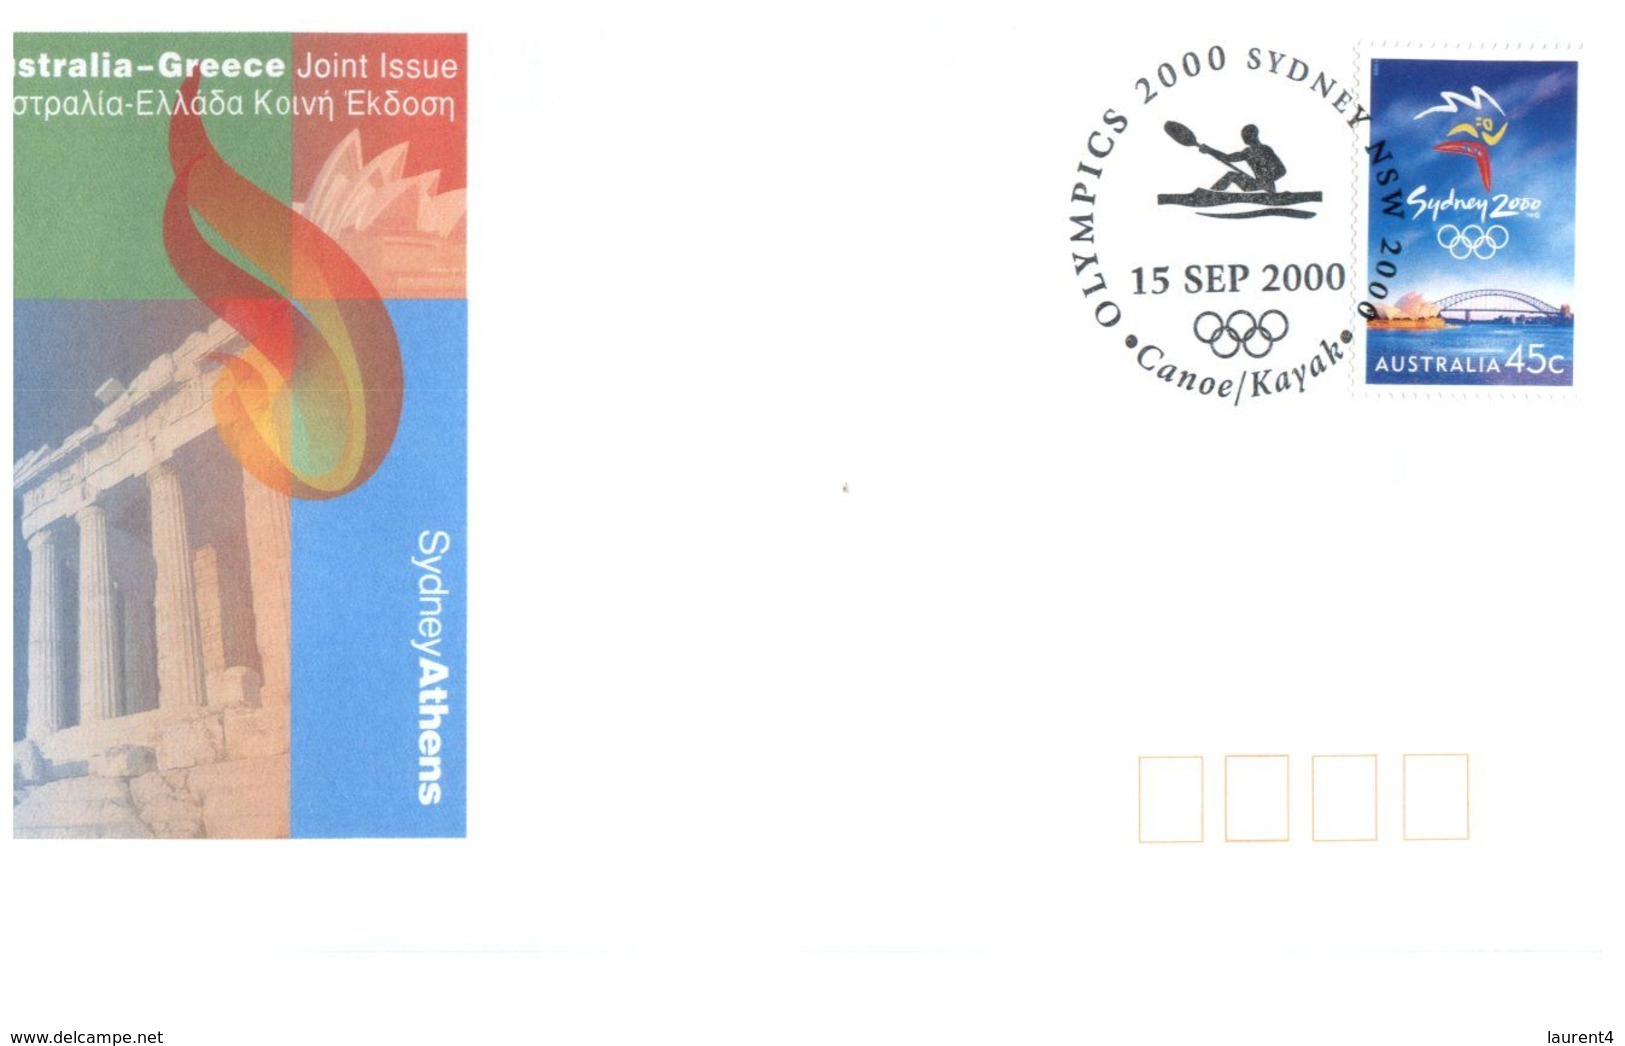 (C 4) Australia - 200 Olympic Games - set of 12 sports cancelled on 15 September 2000